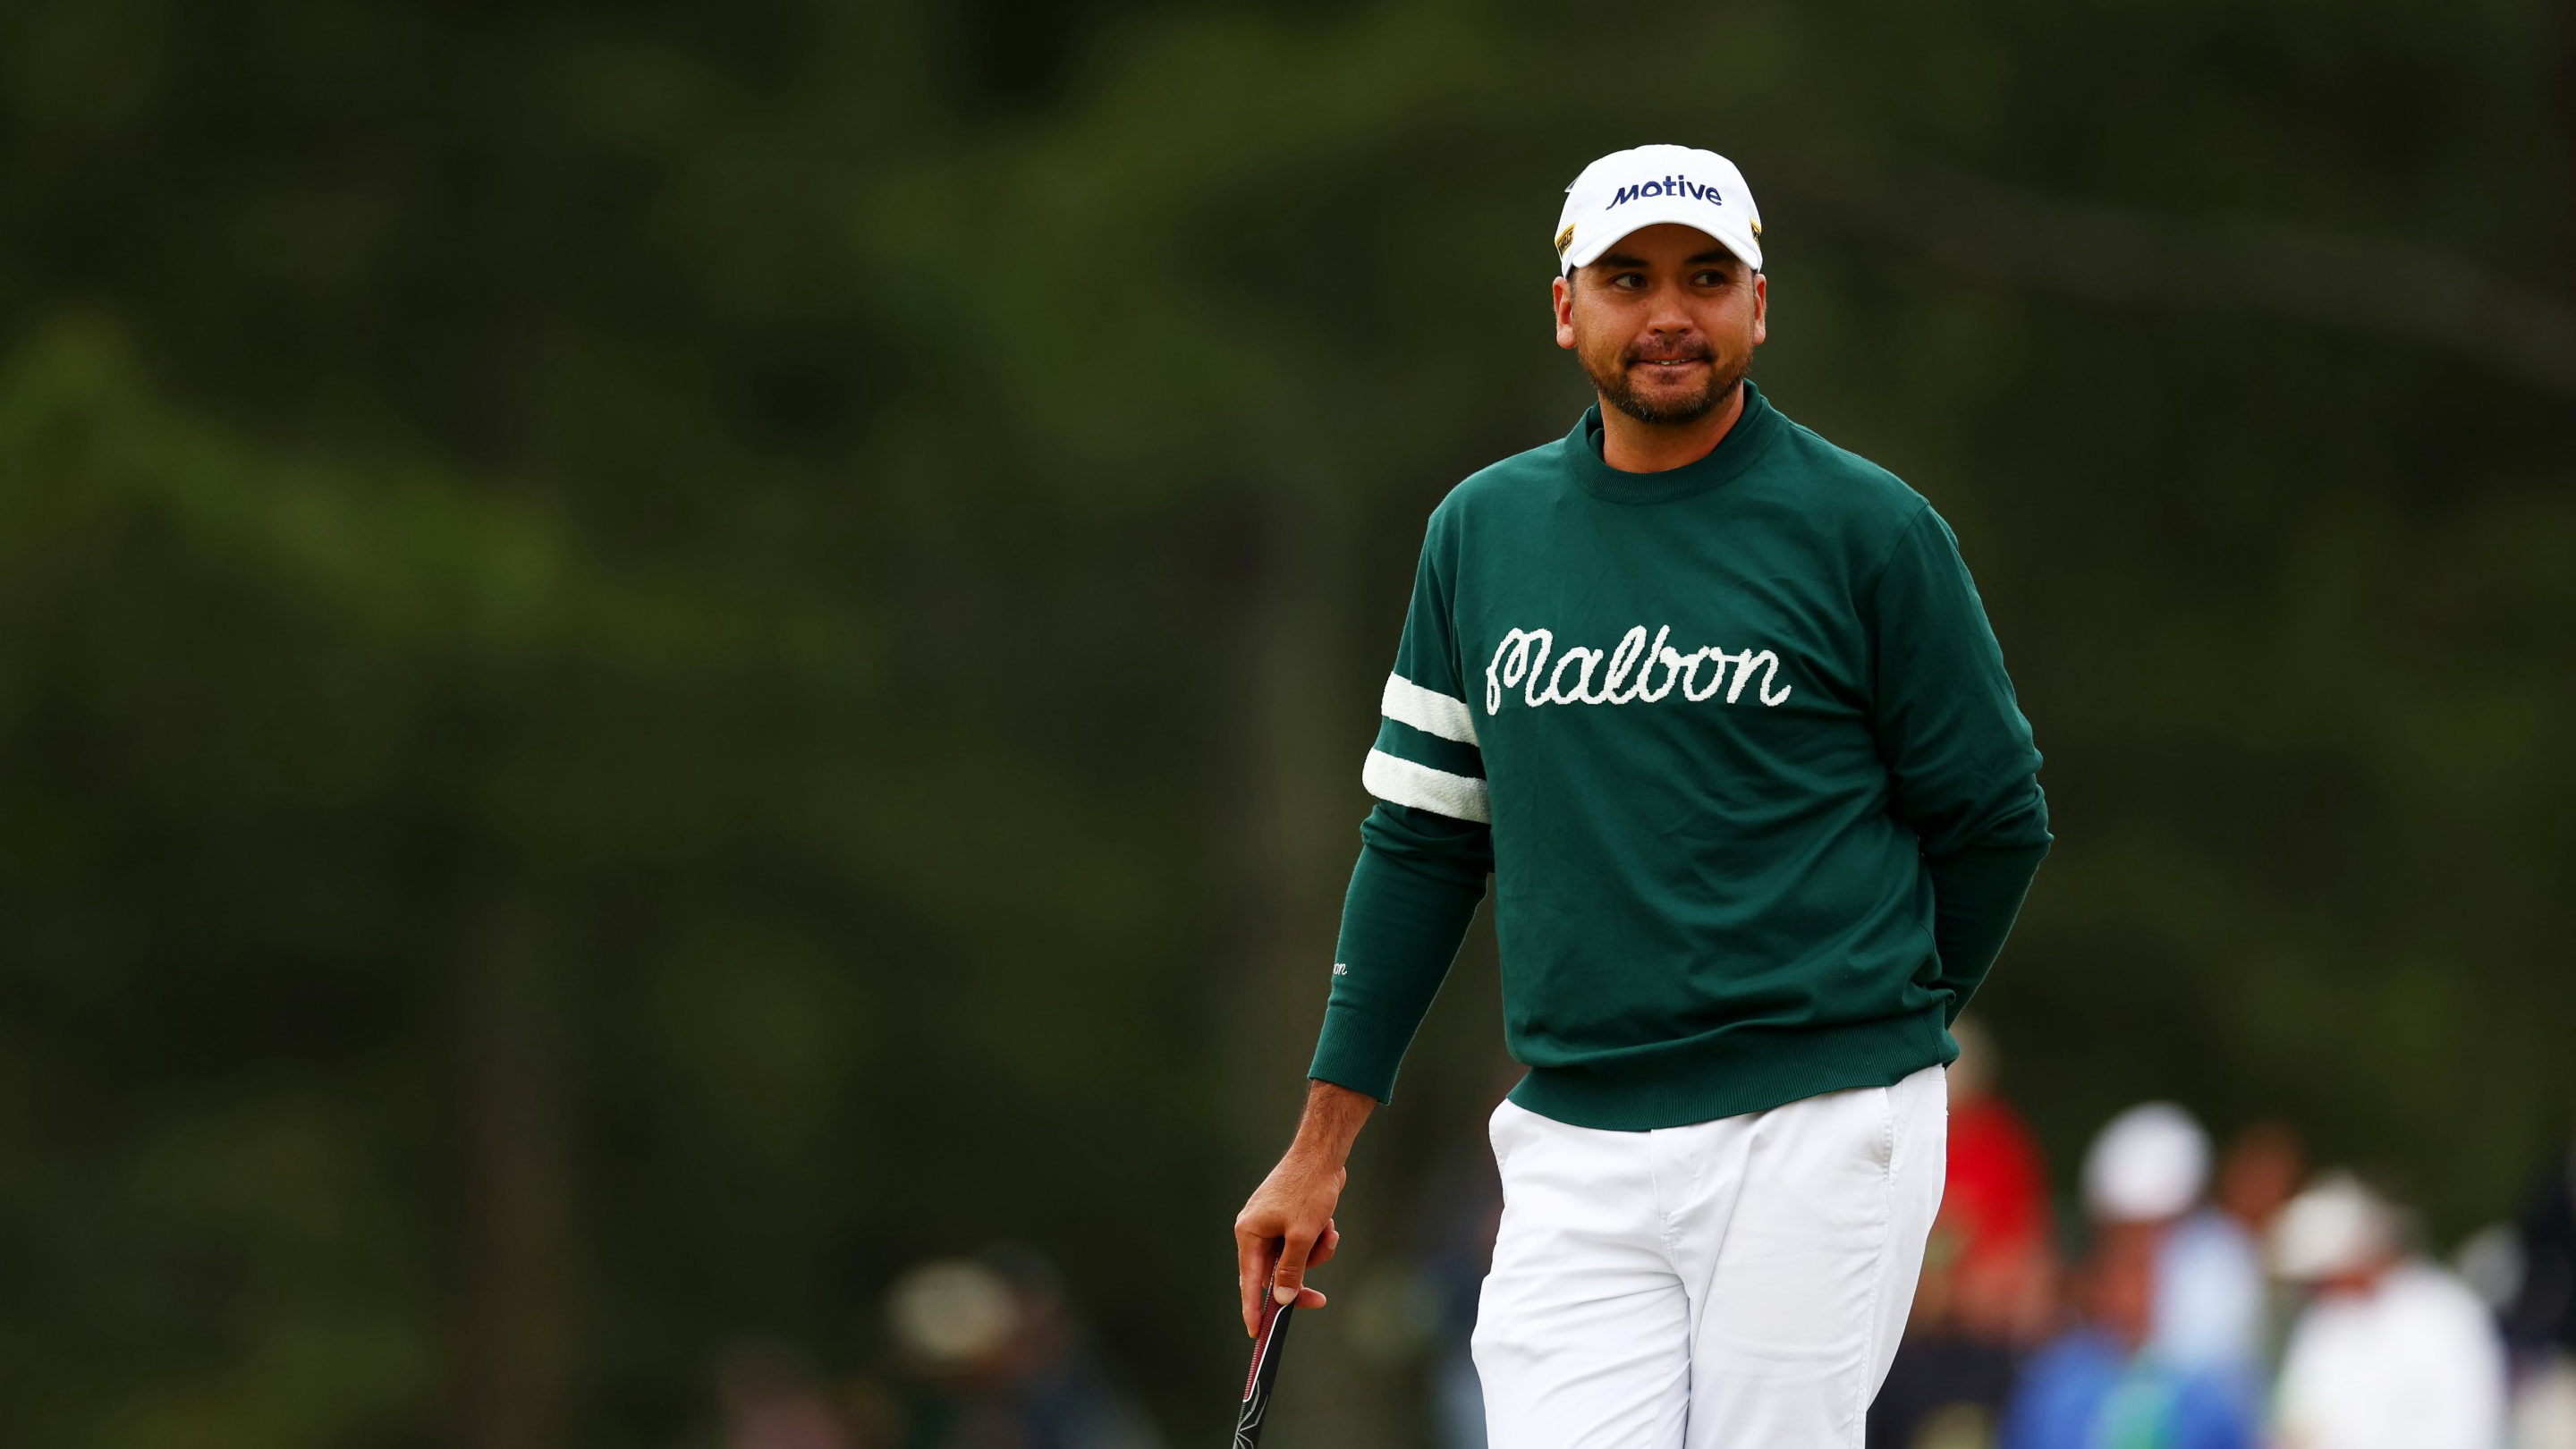 Jason Day's Clothes Are the Early Story of the Masters